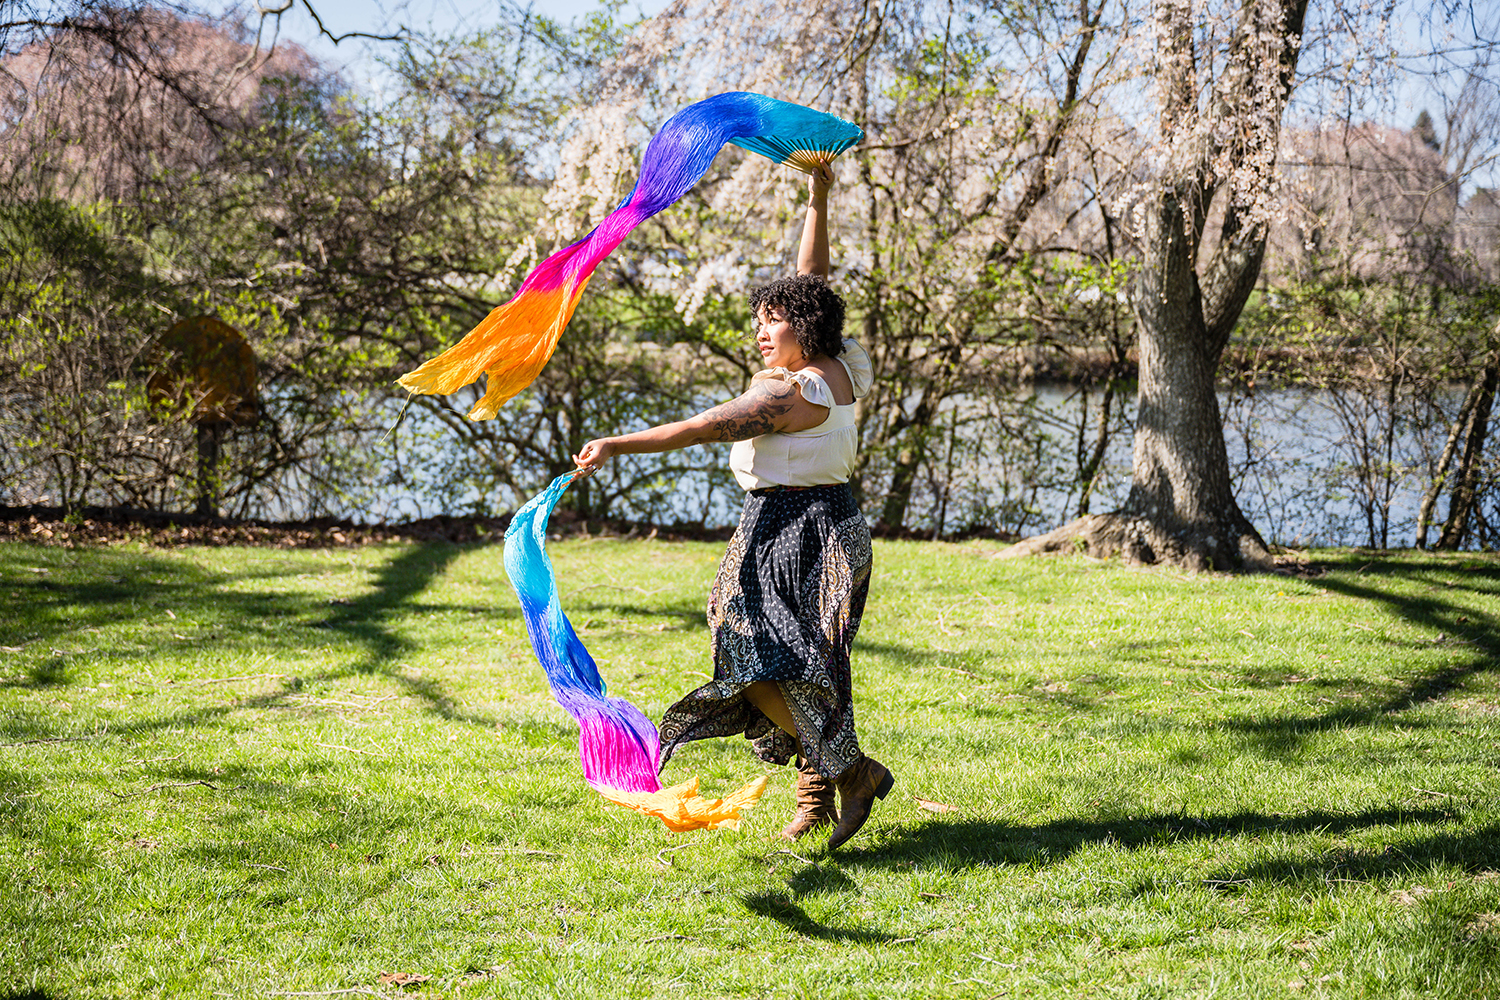 A queer BIPOC individual jumps slightly in the air as they wave their colorful silk fans during a performance at Duck Pond.